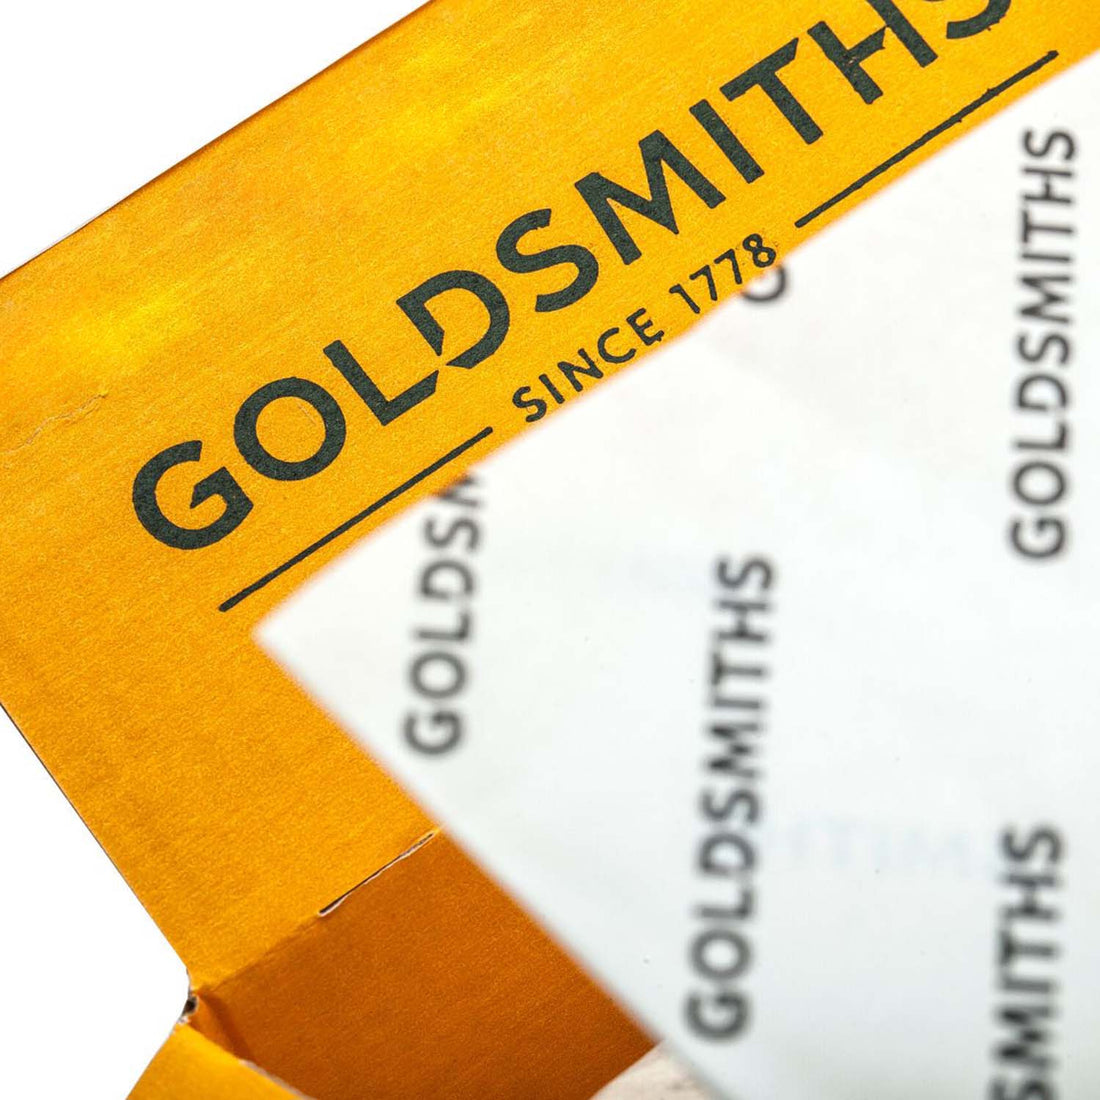 Goldsmiths - eCommerce Packaging Case Study